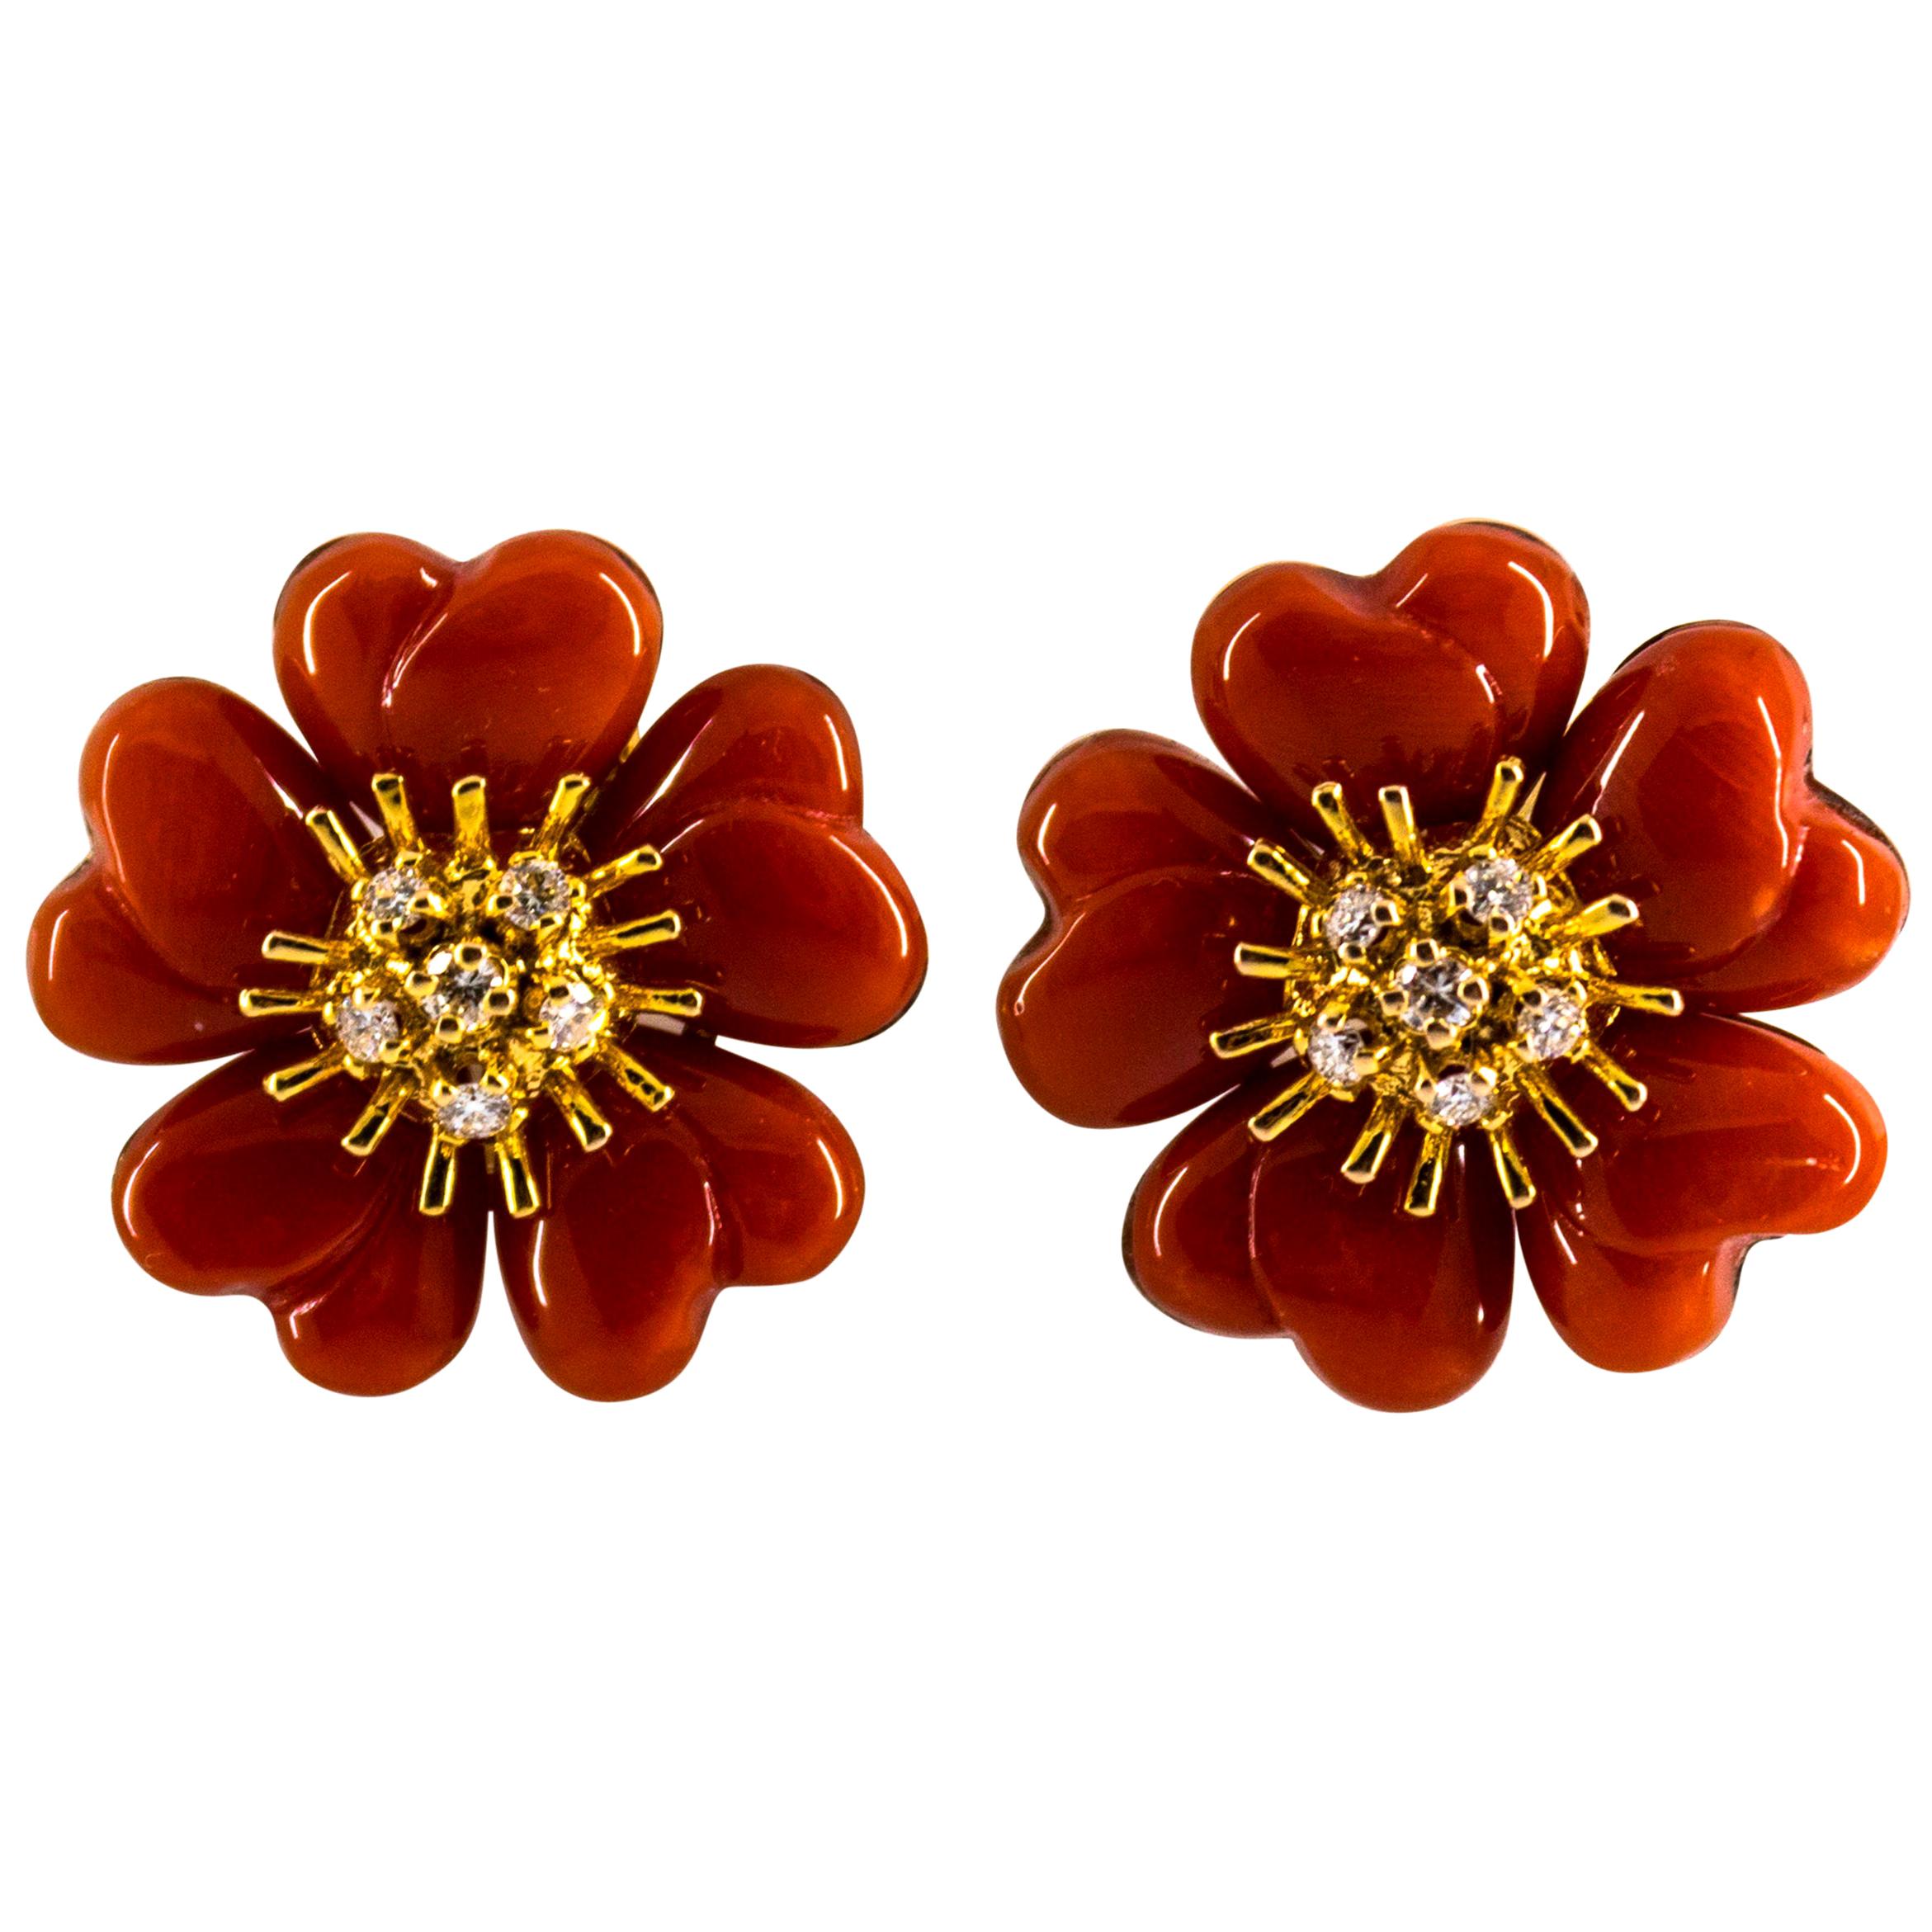 Mediterranean Red Coral 0.45 Carat White Diamond Yellow Gold "Flowers" Earrings